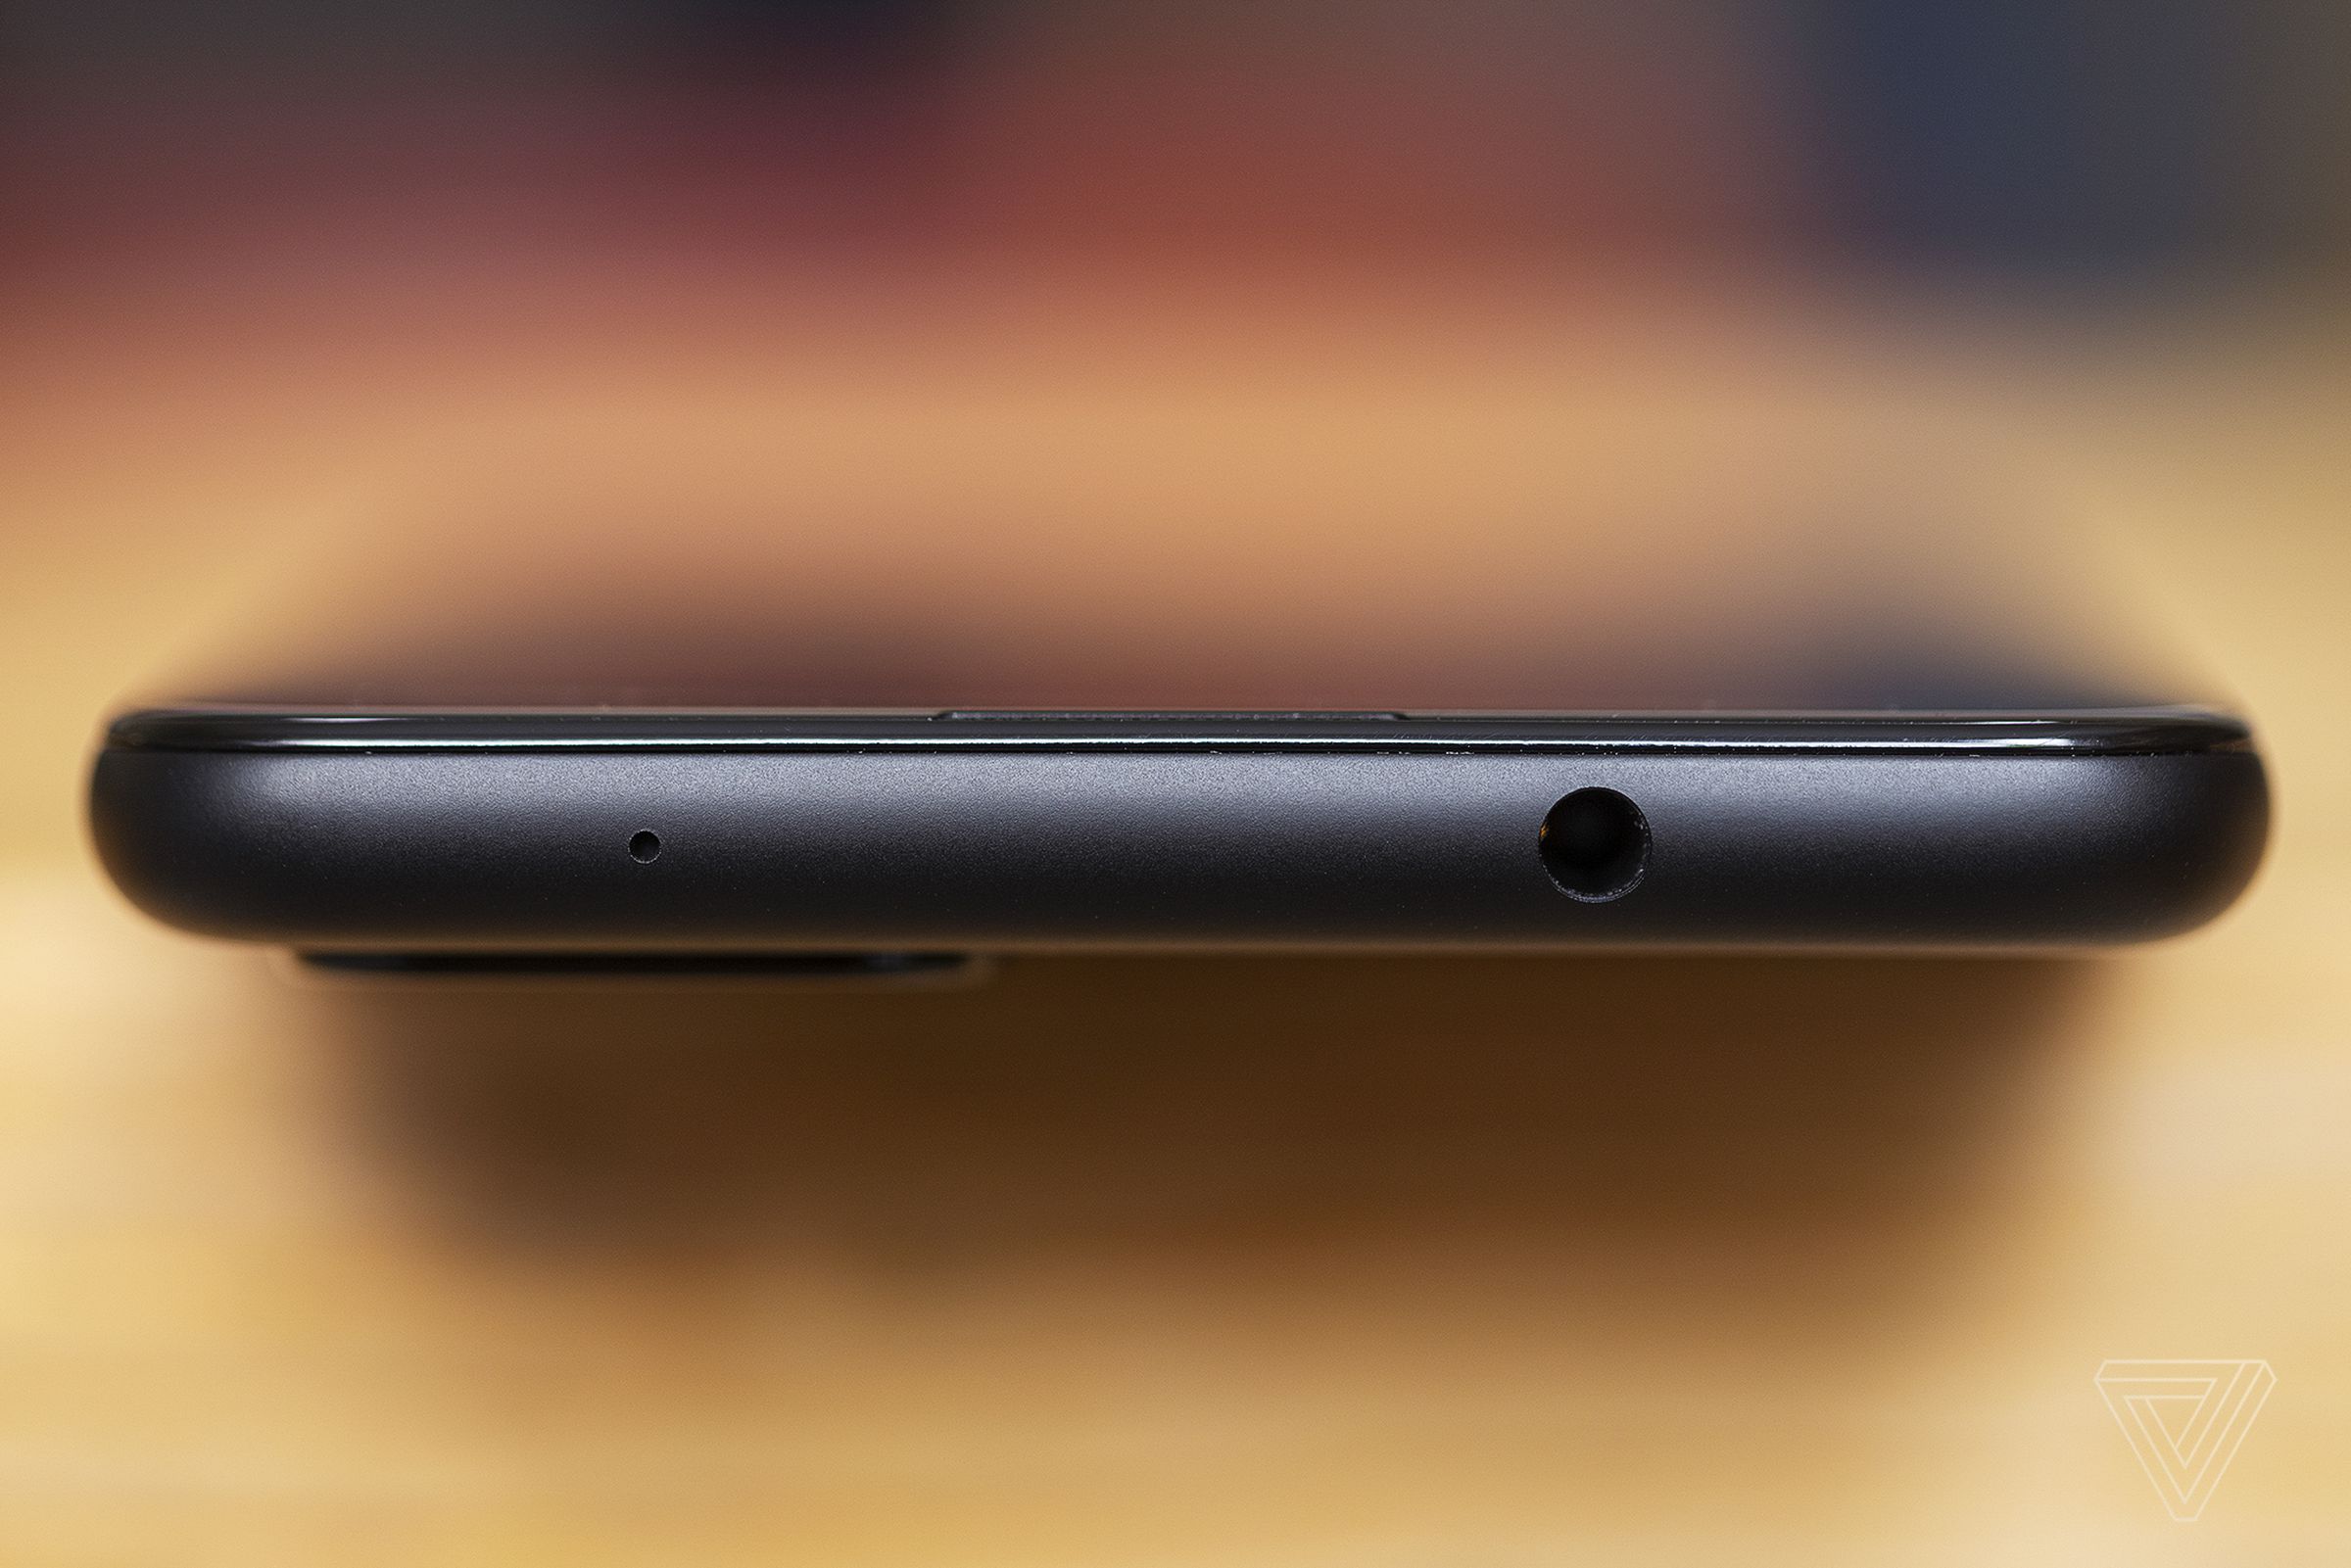 There’s also a headphone jack — hooray!